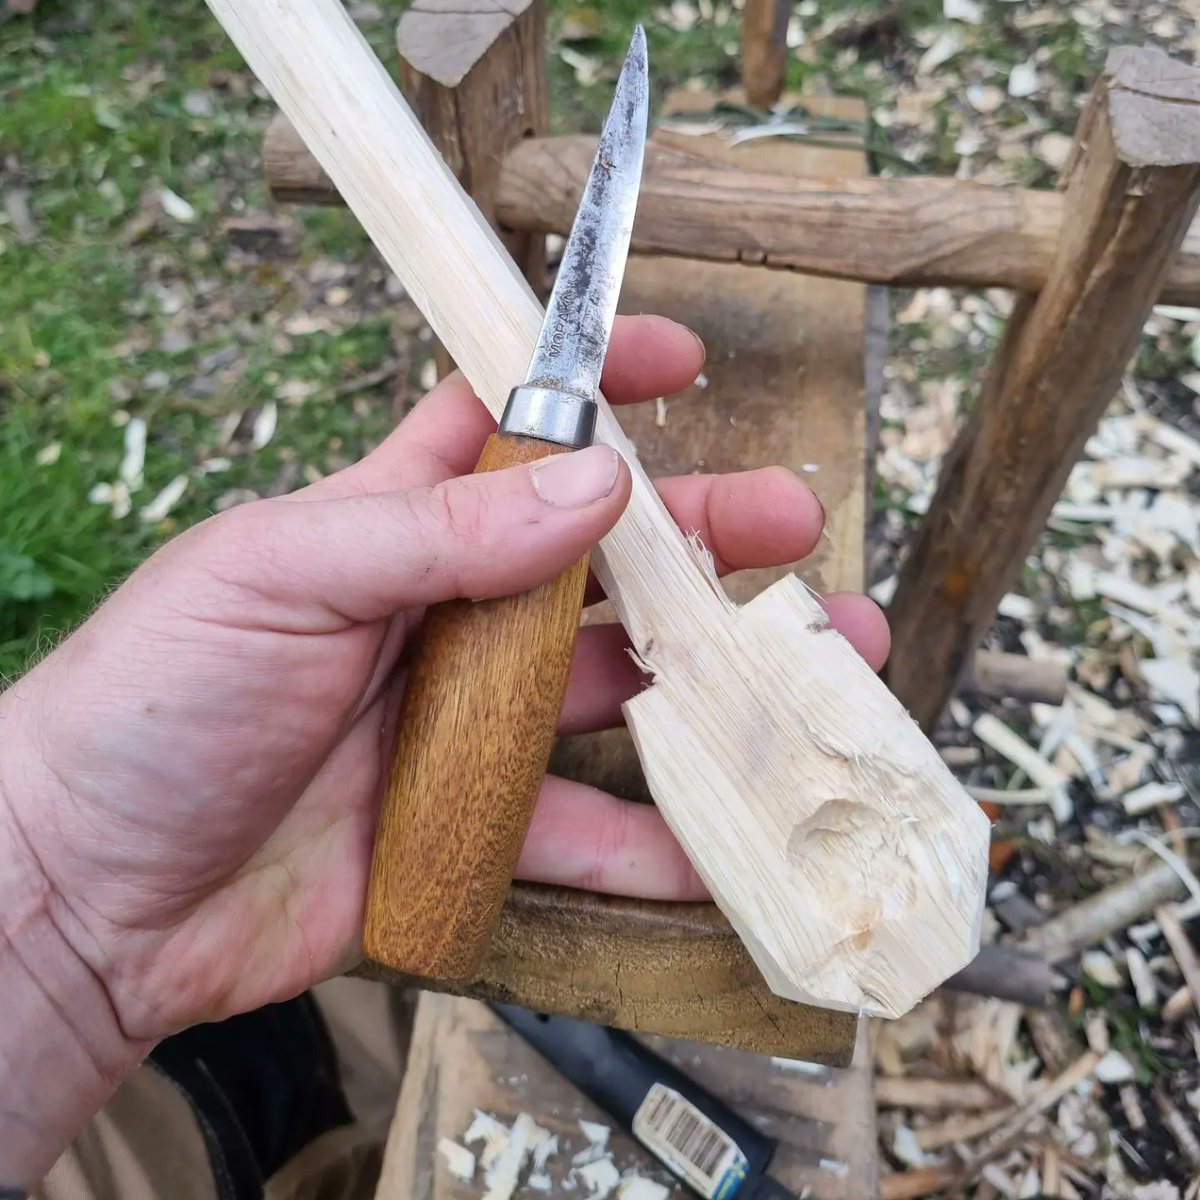 Carving a spoon blank 🌳🪓🪵🥄

#spooncarving #woodcarving #handmade #woodenspoon #woodworking #greenwoodworking #spooncarver #spoon #carving #woodcraft  #wood #handcarved #handcrafted #whittling #bushcraft #craft #greenwoodcarving #woodwork #woodart #greenwood #woodspoon